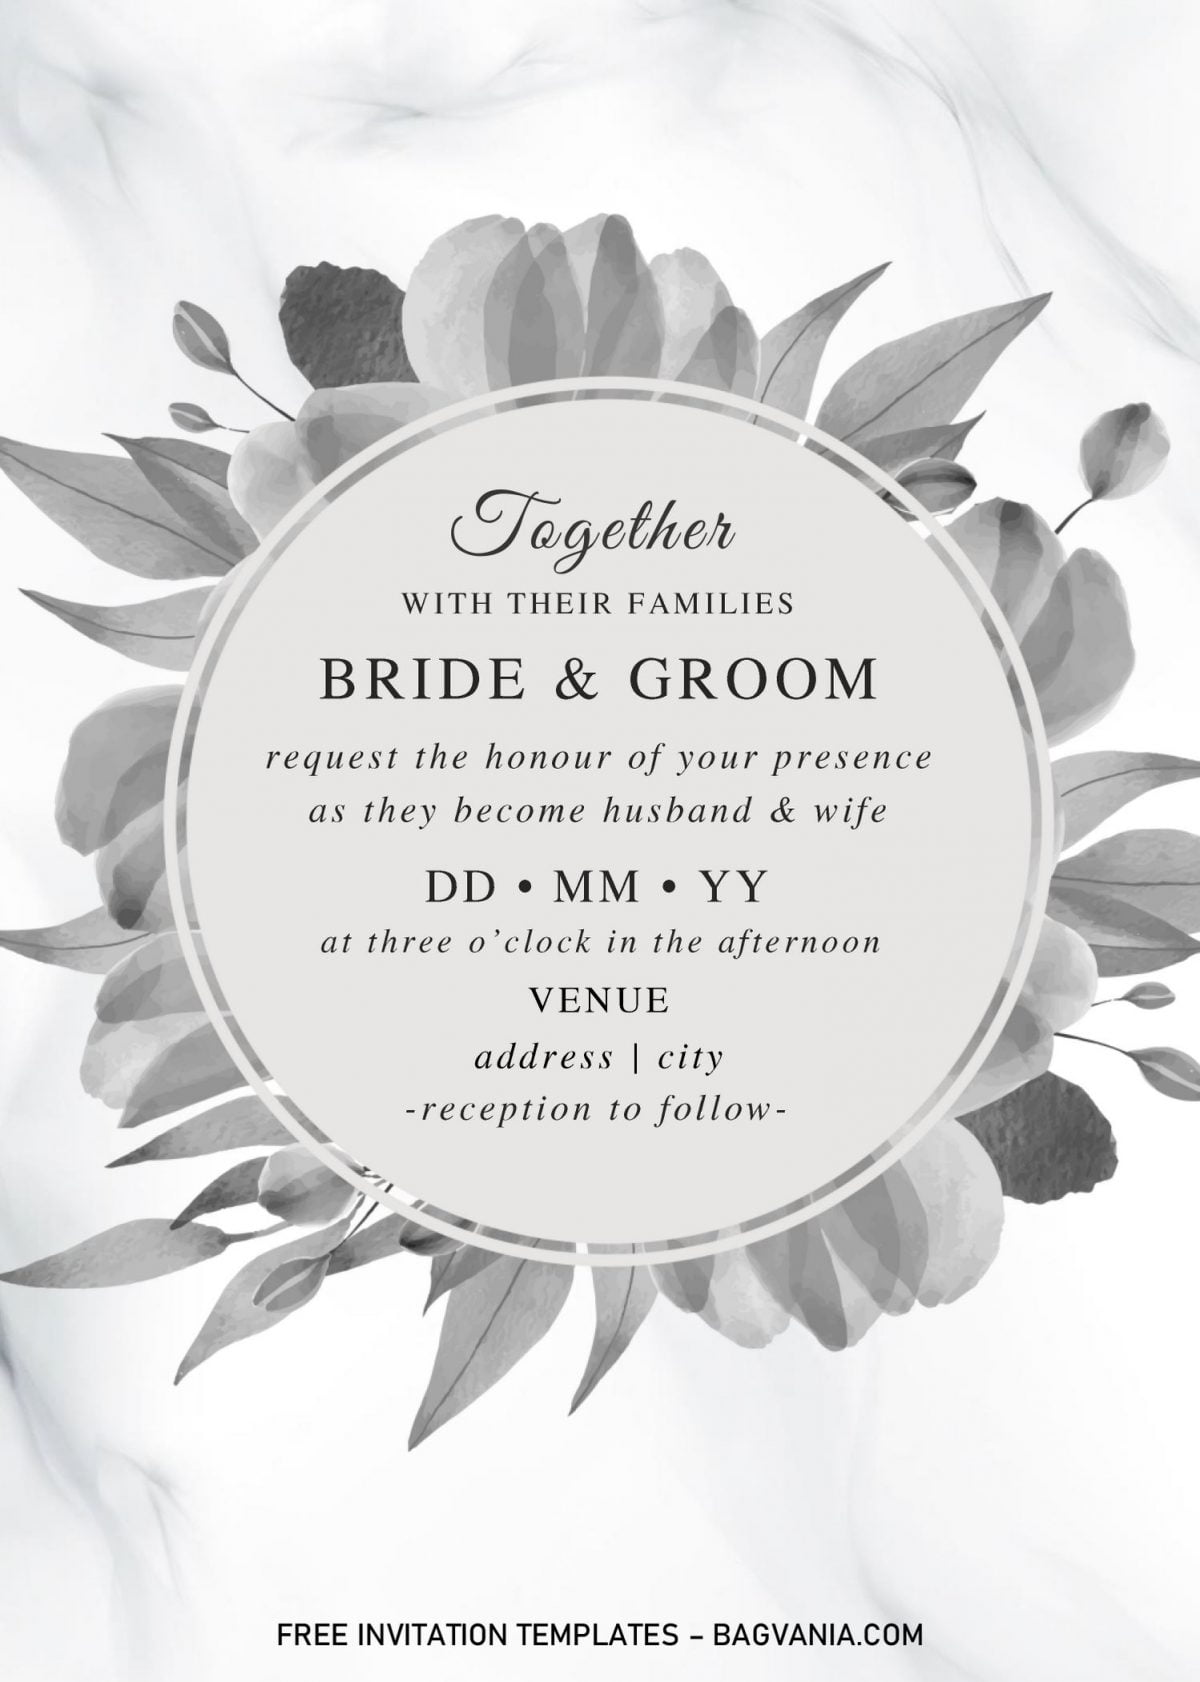 Black And White Wedding Invitation Templates - Editable With MS Word and has white and black marble background